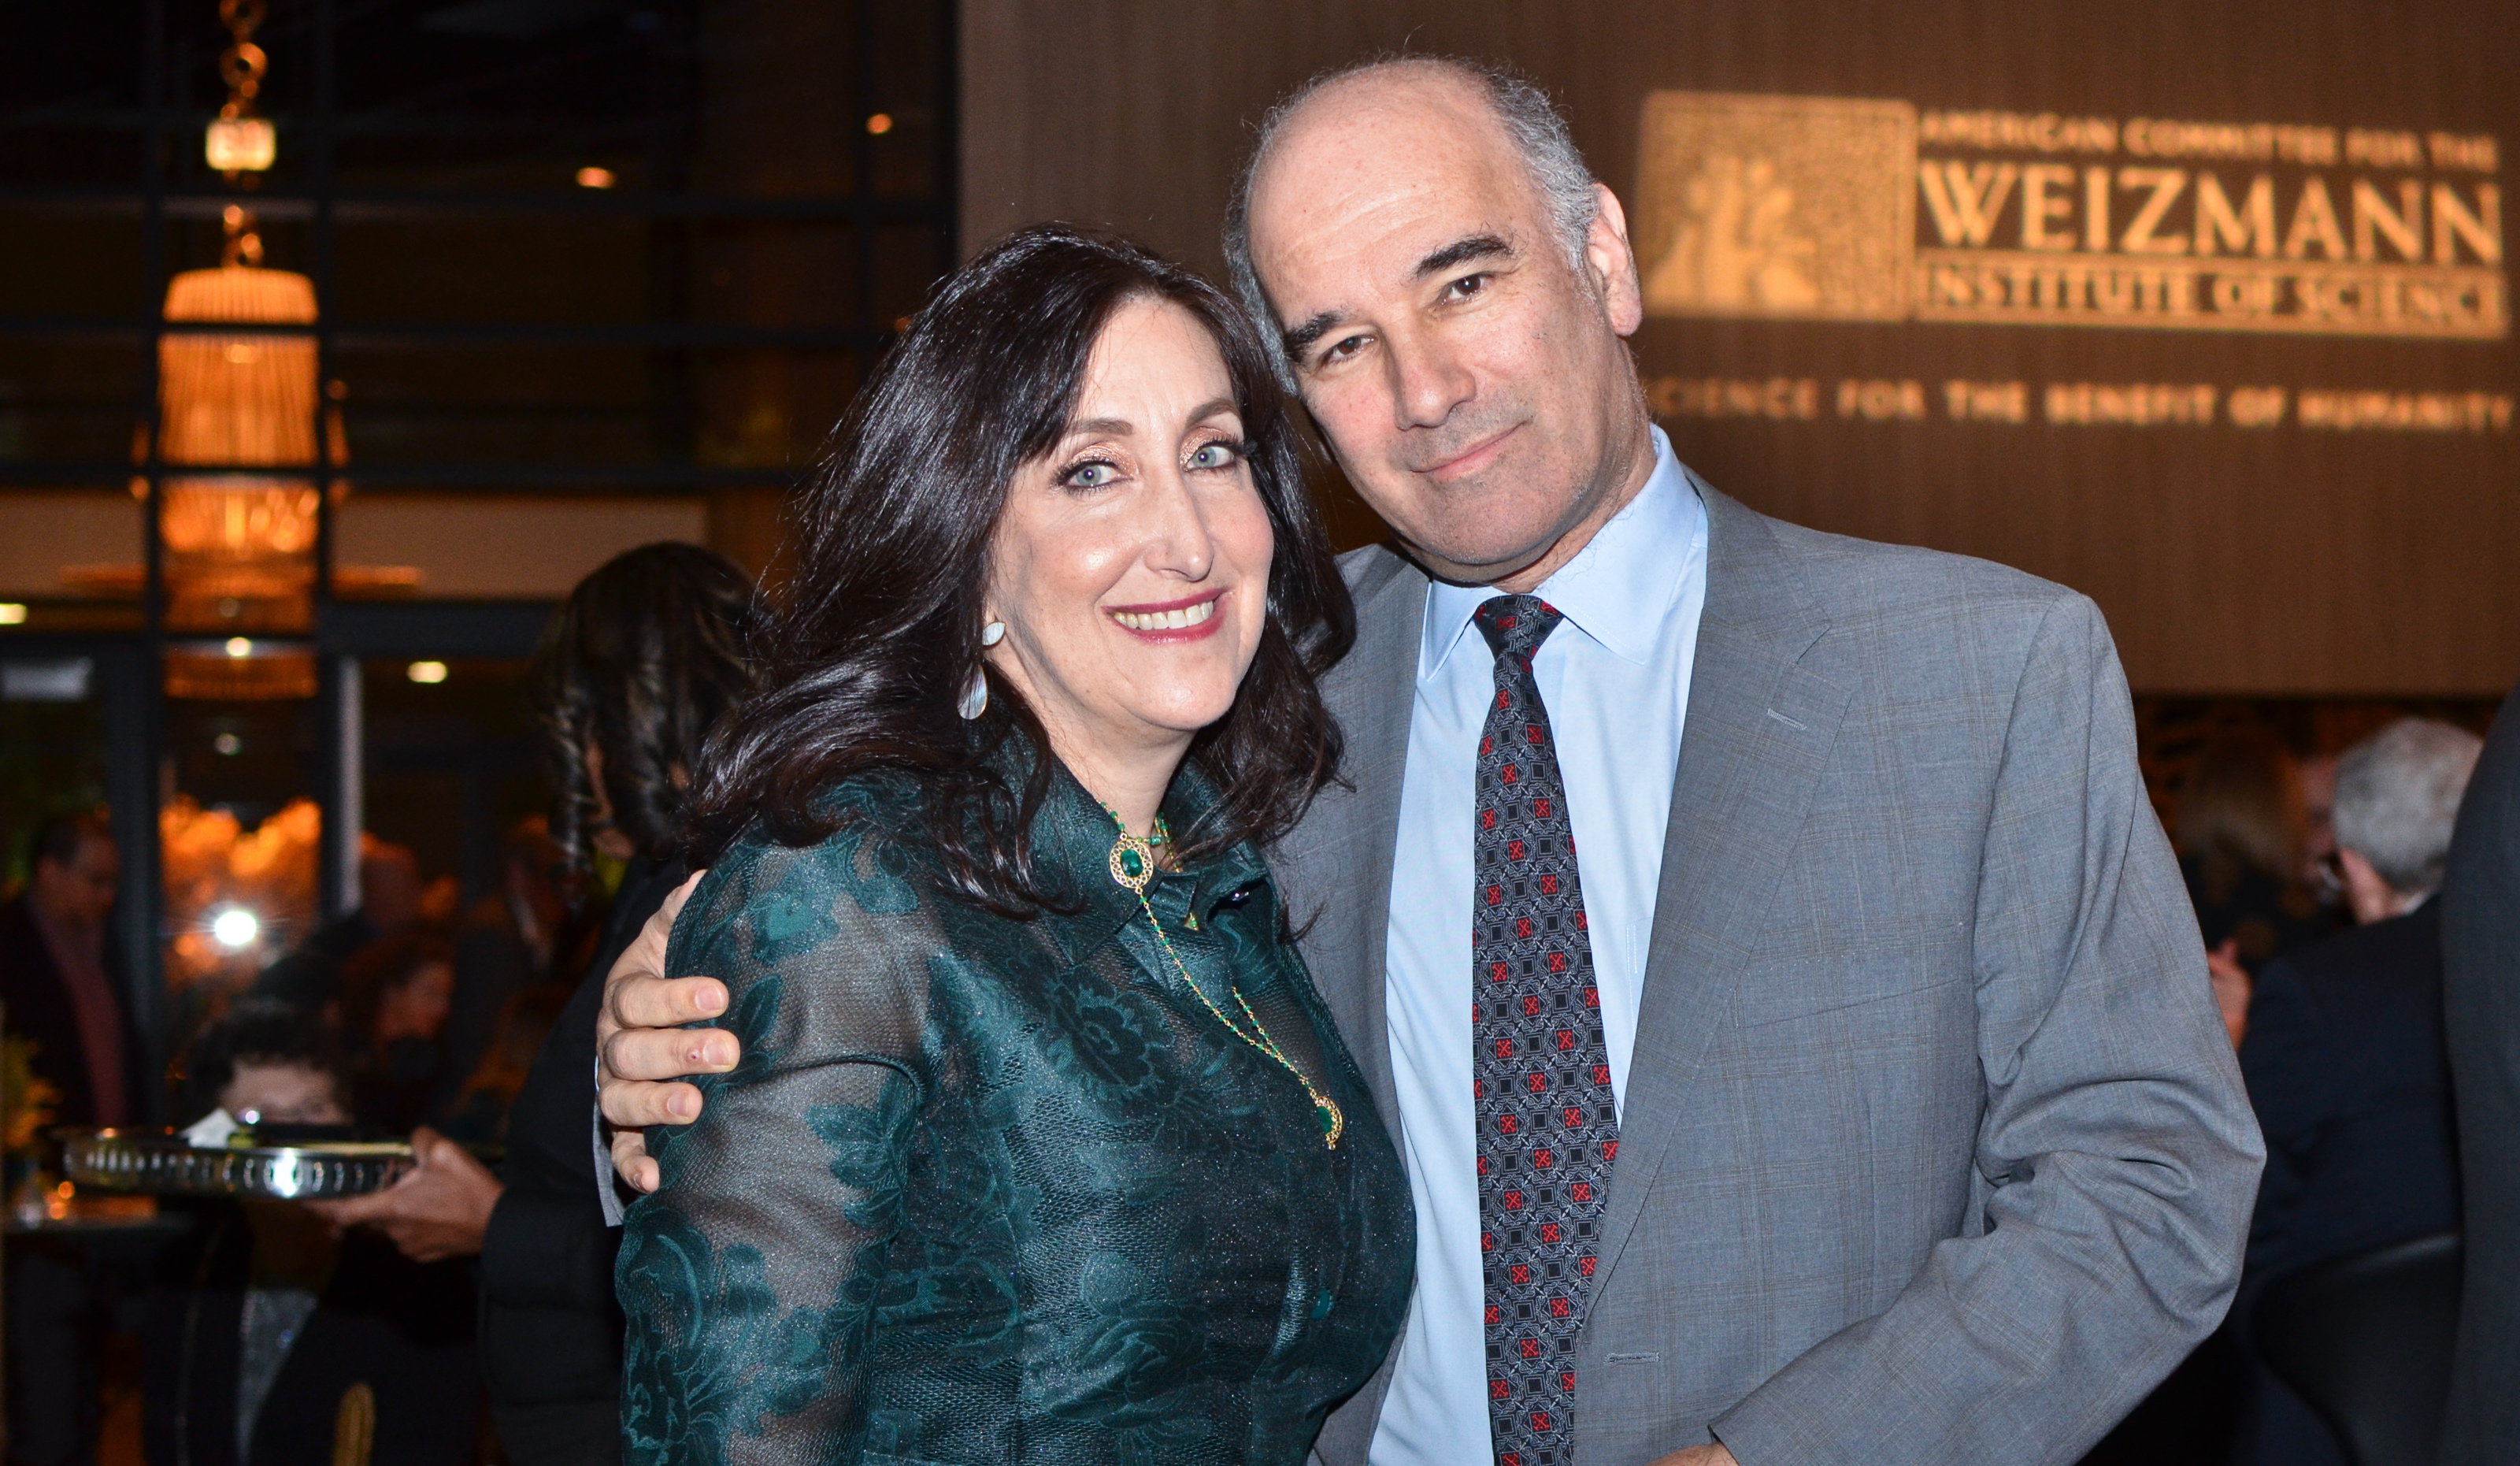 ACWIS 2019 Gala: Dr. Marilyn Perlman and Harry Epstein